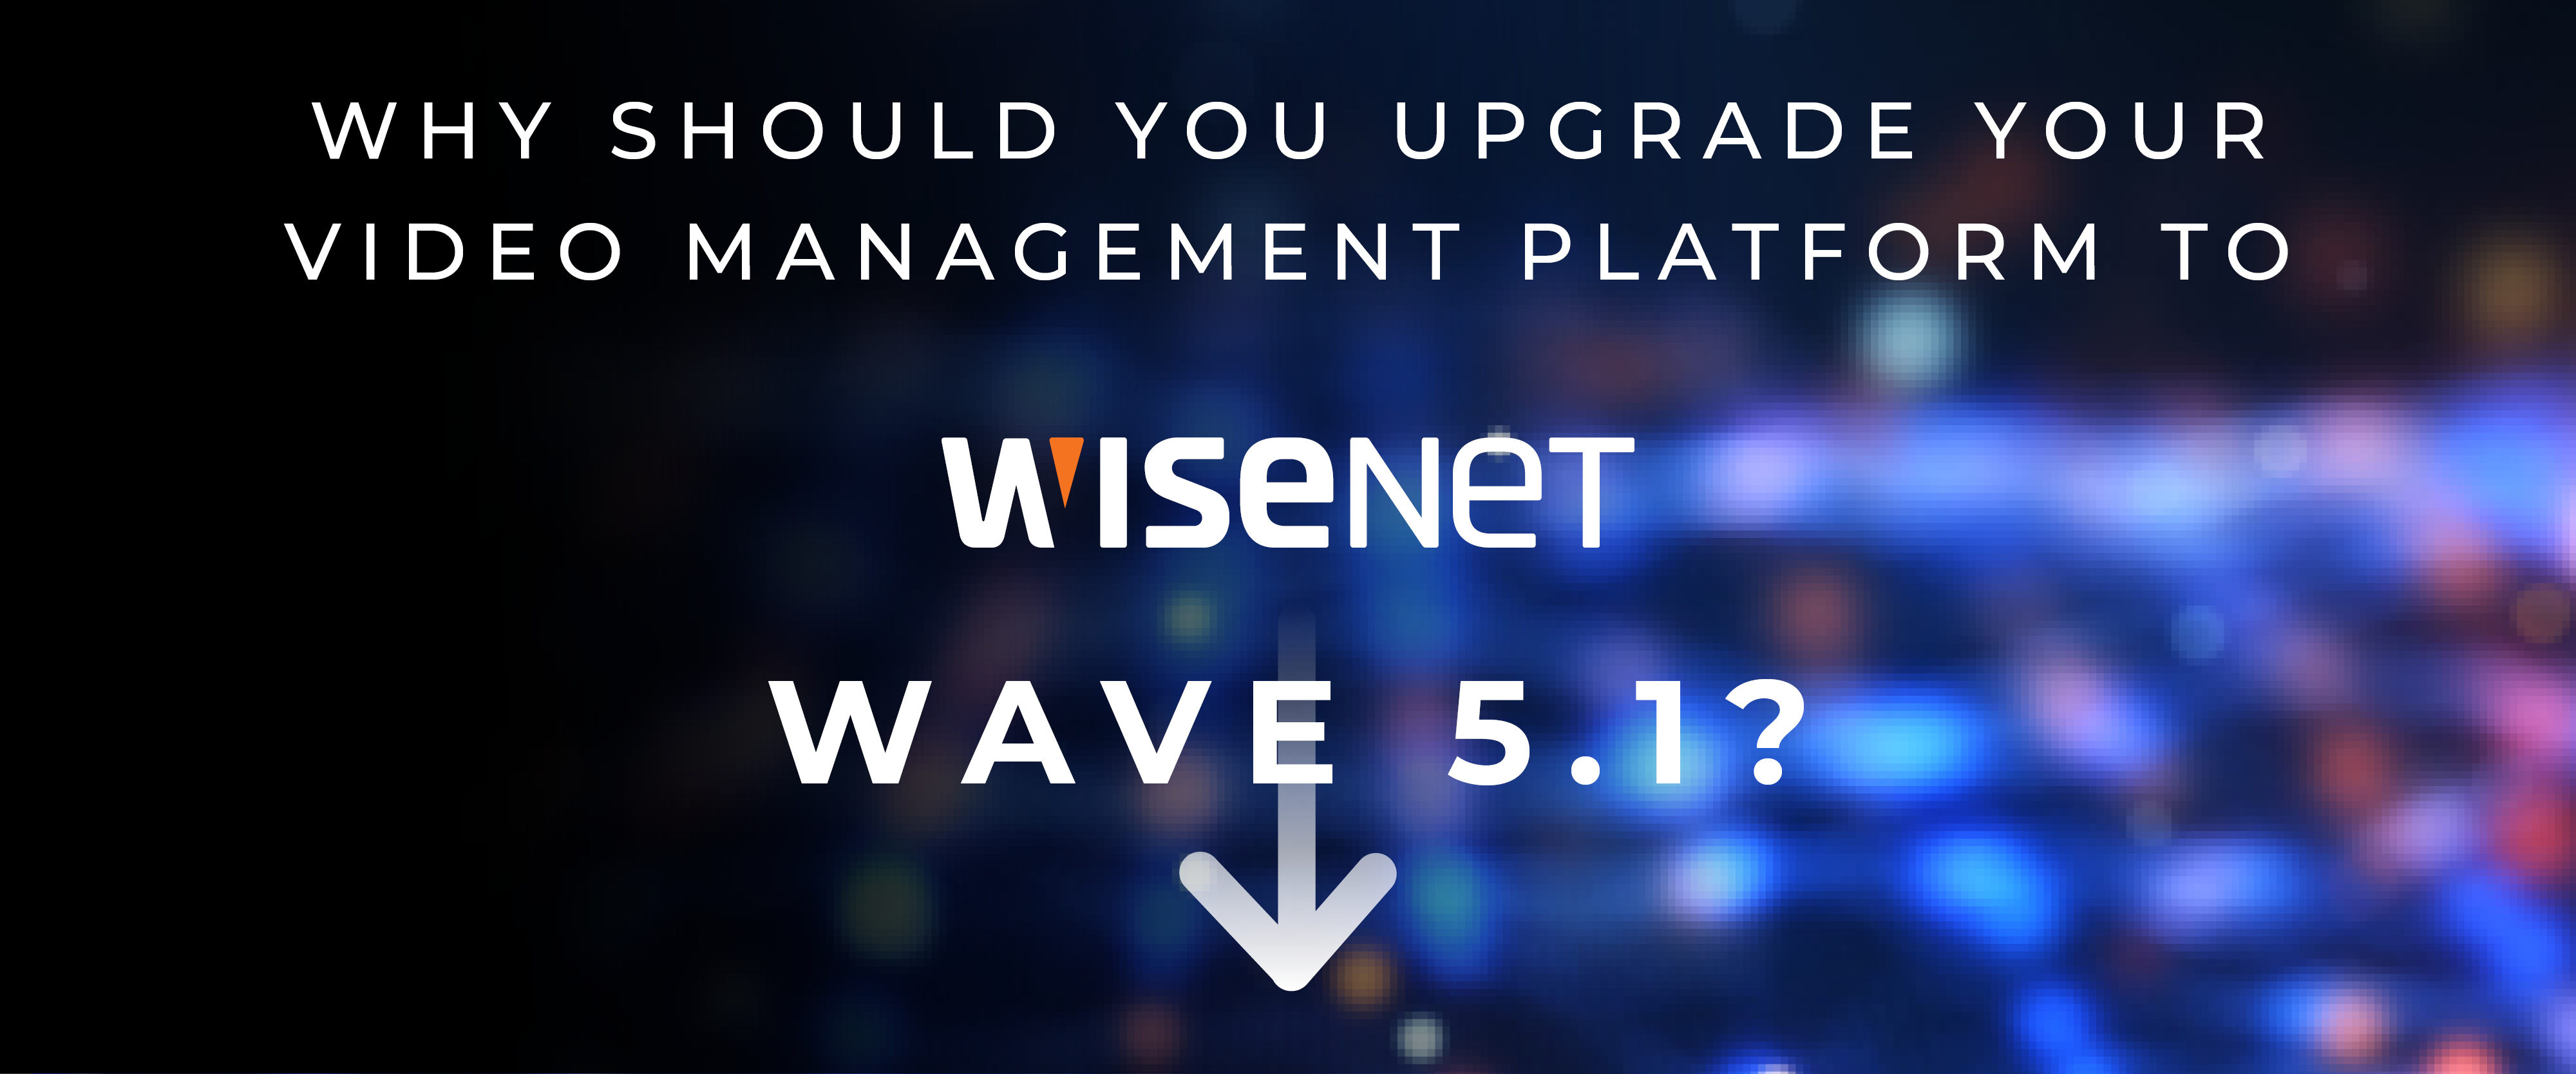 why should you upgrade your Video management platform to Wisenet's WAVE 5.1